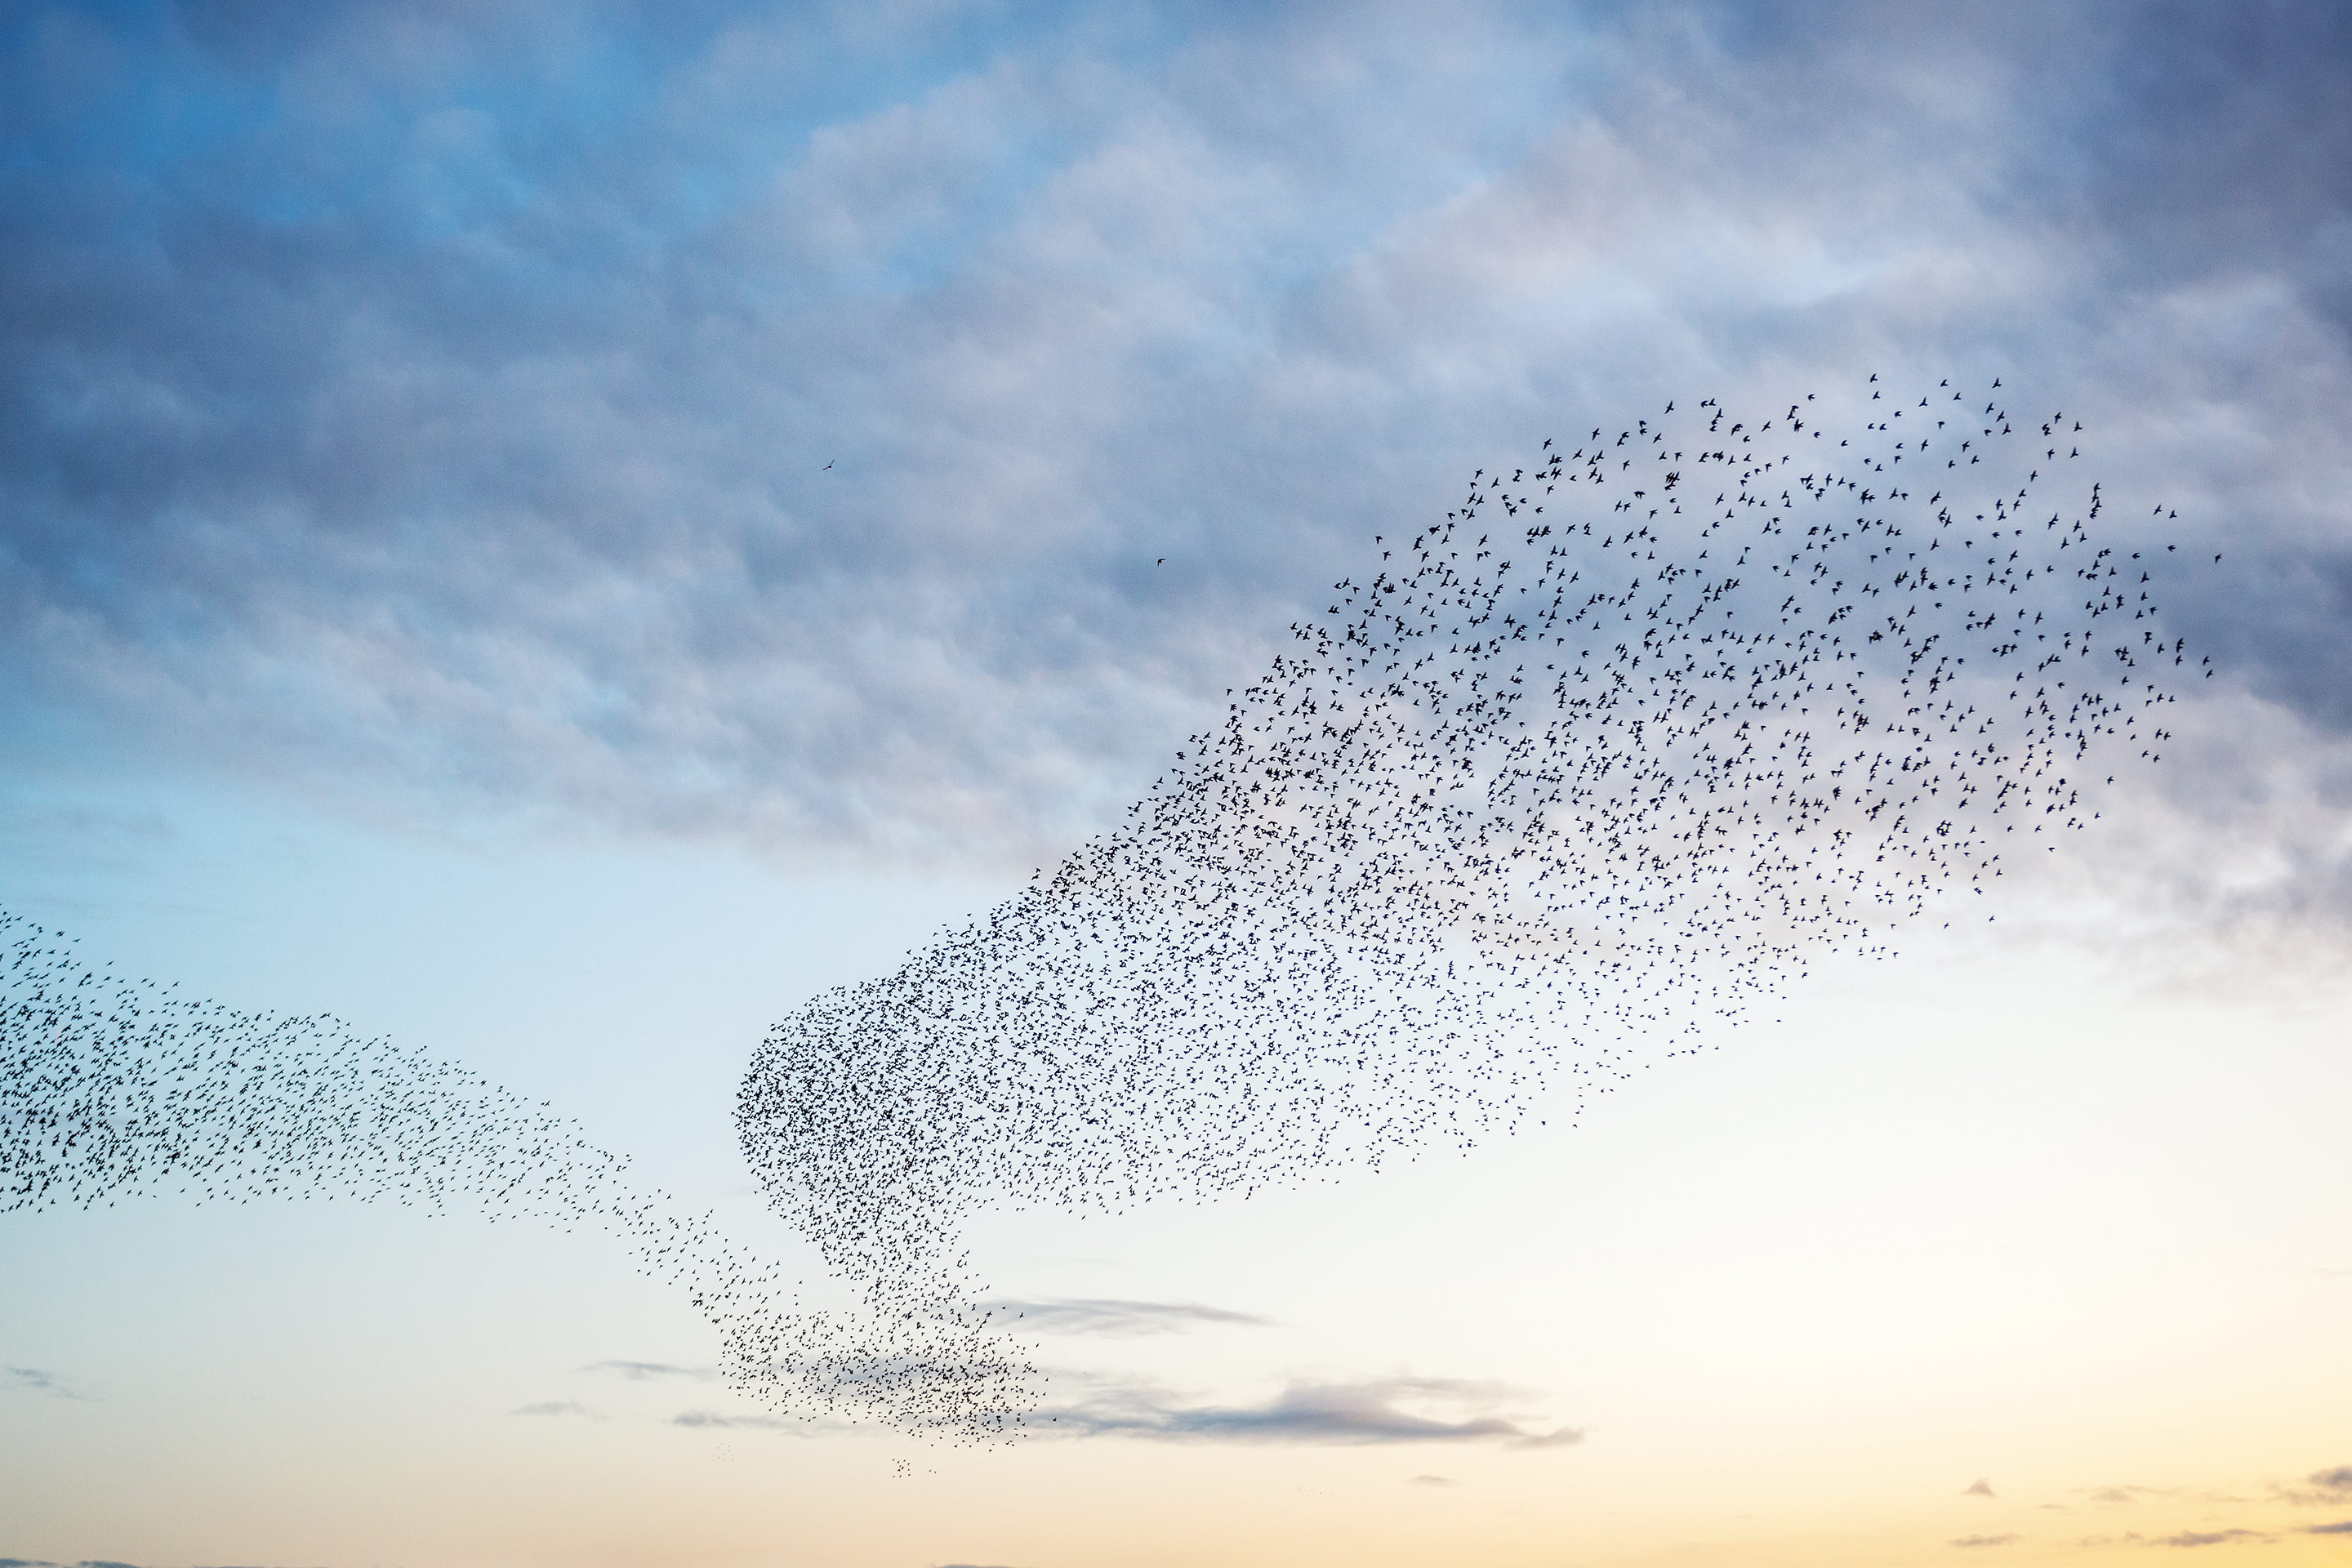 A large group of birds flying in formations over a sunset representing communities.